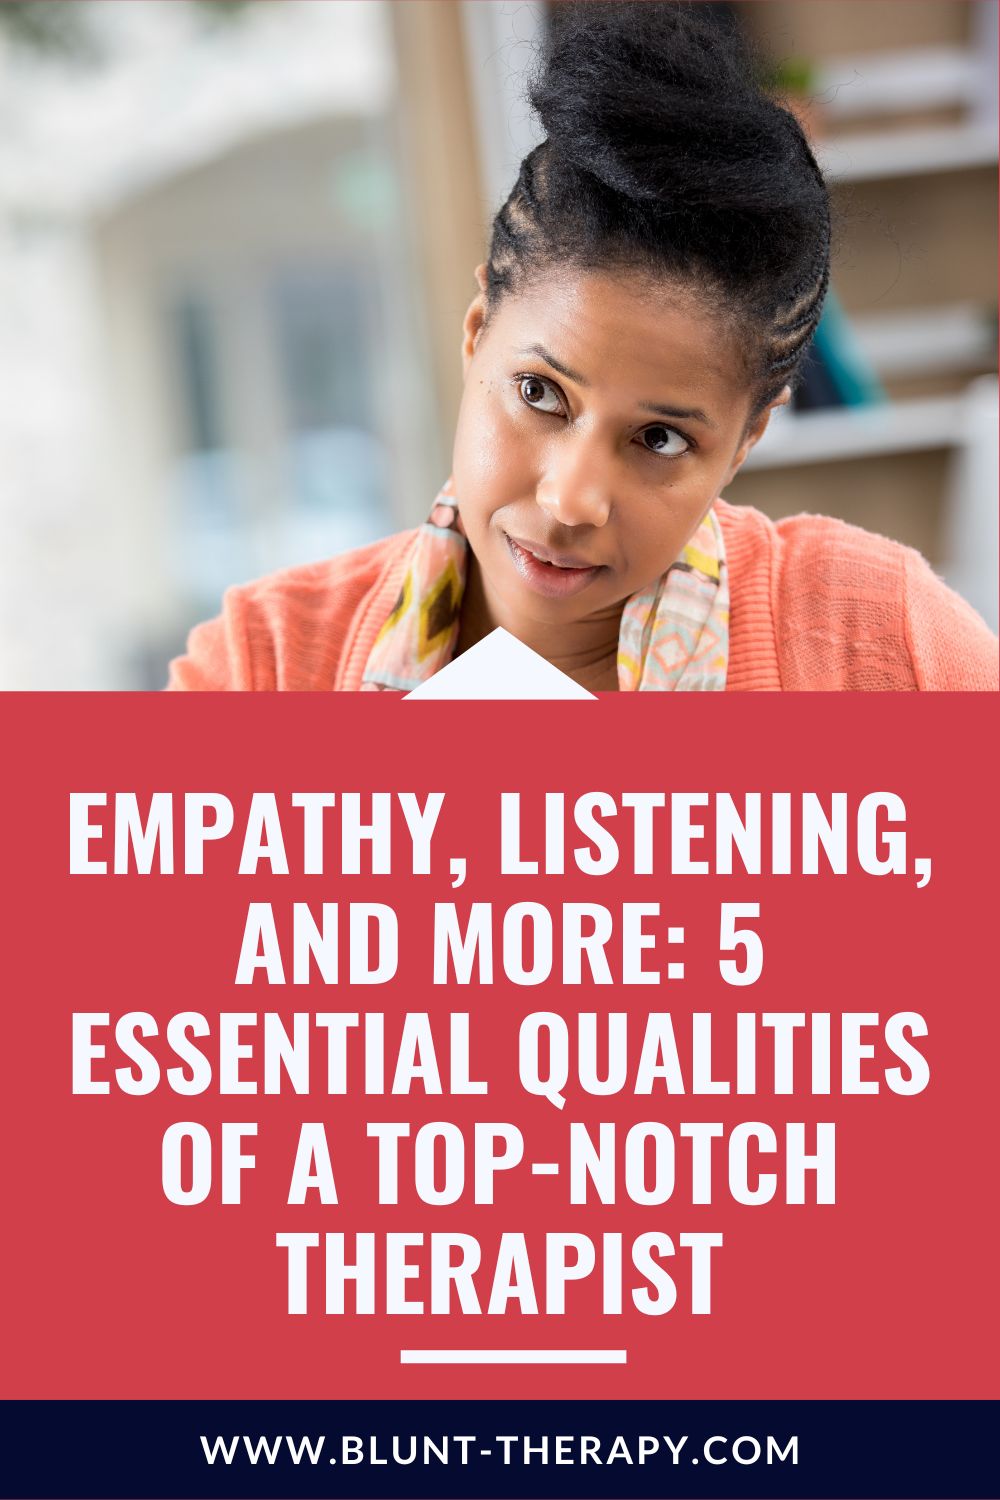 Empathy, Listening, and More: 5 Essential Qualities of a Good Therapist